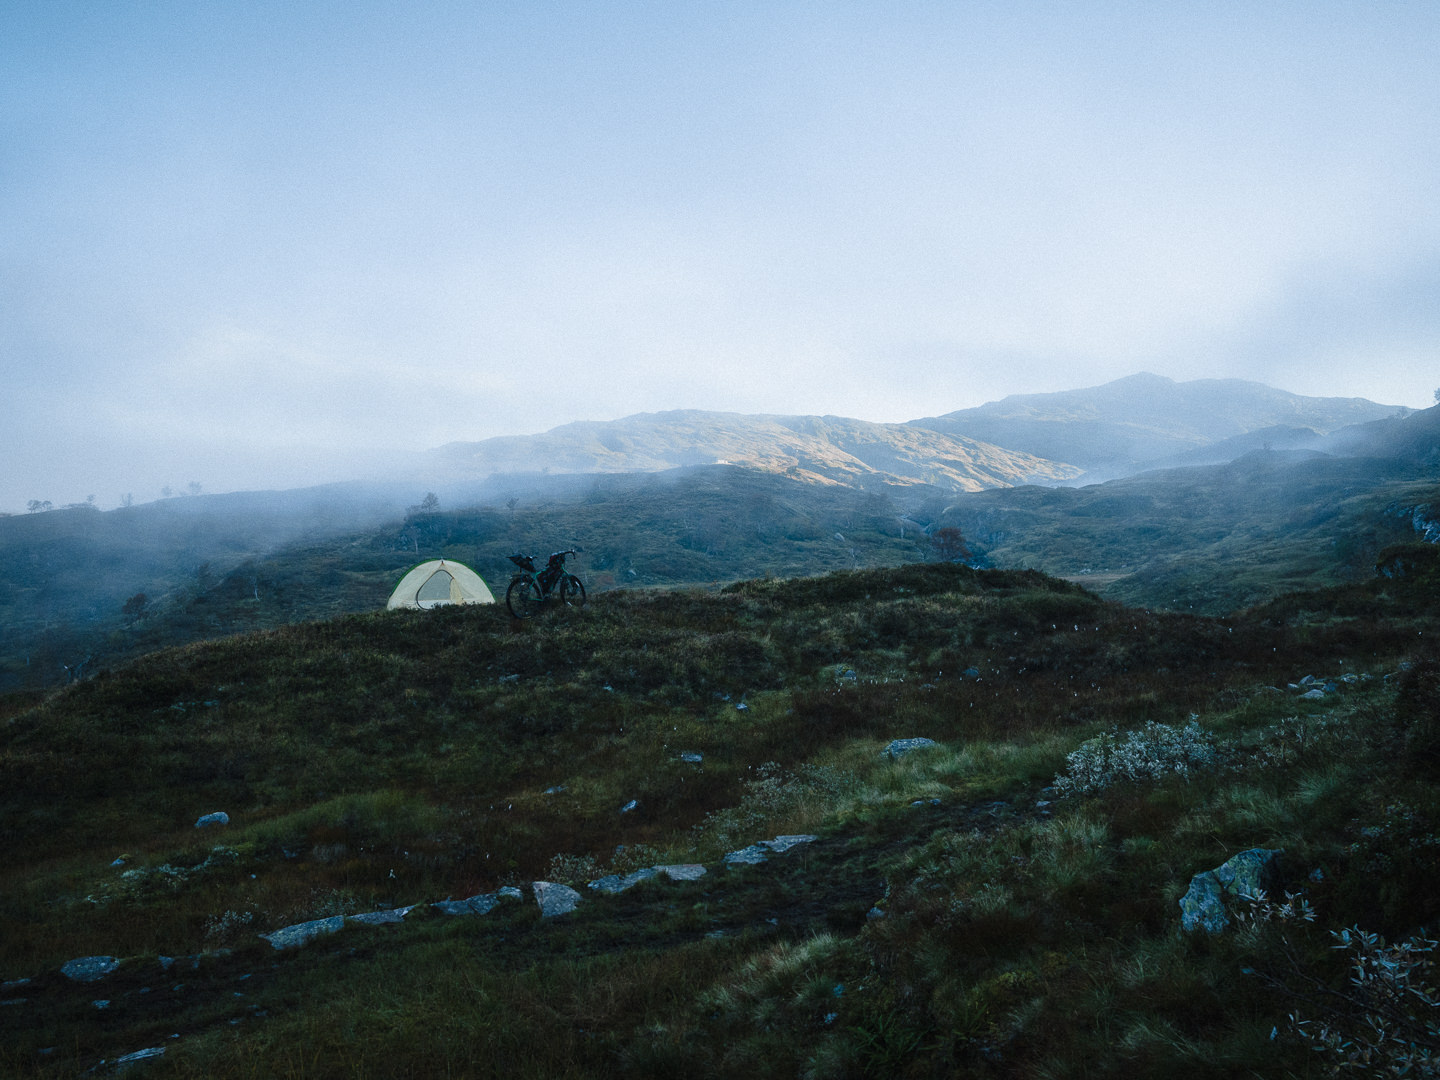 Morning landscape showing tent and distant fog in mountain landscape.